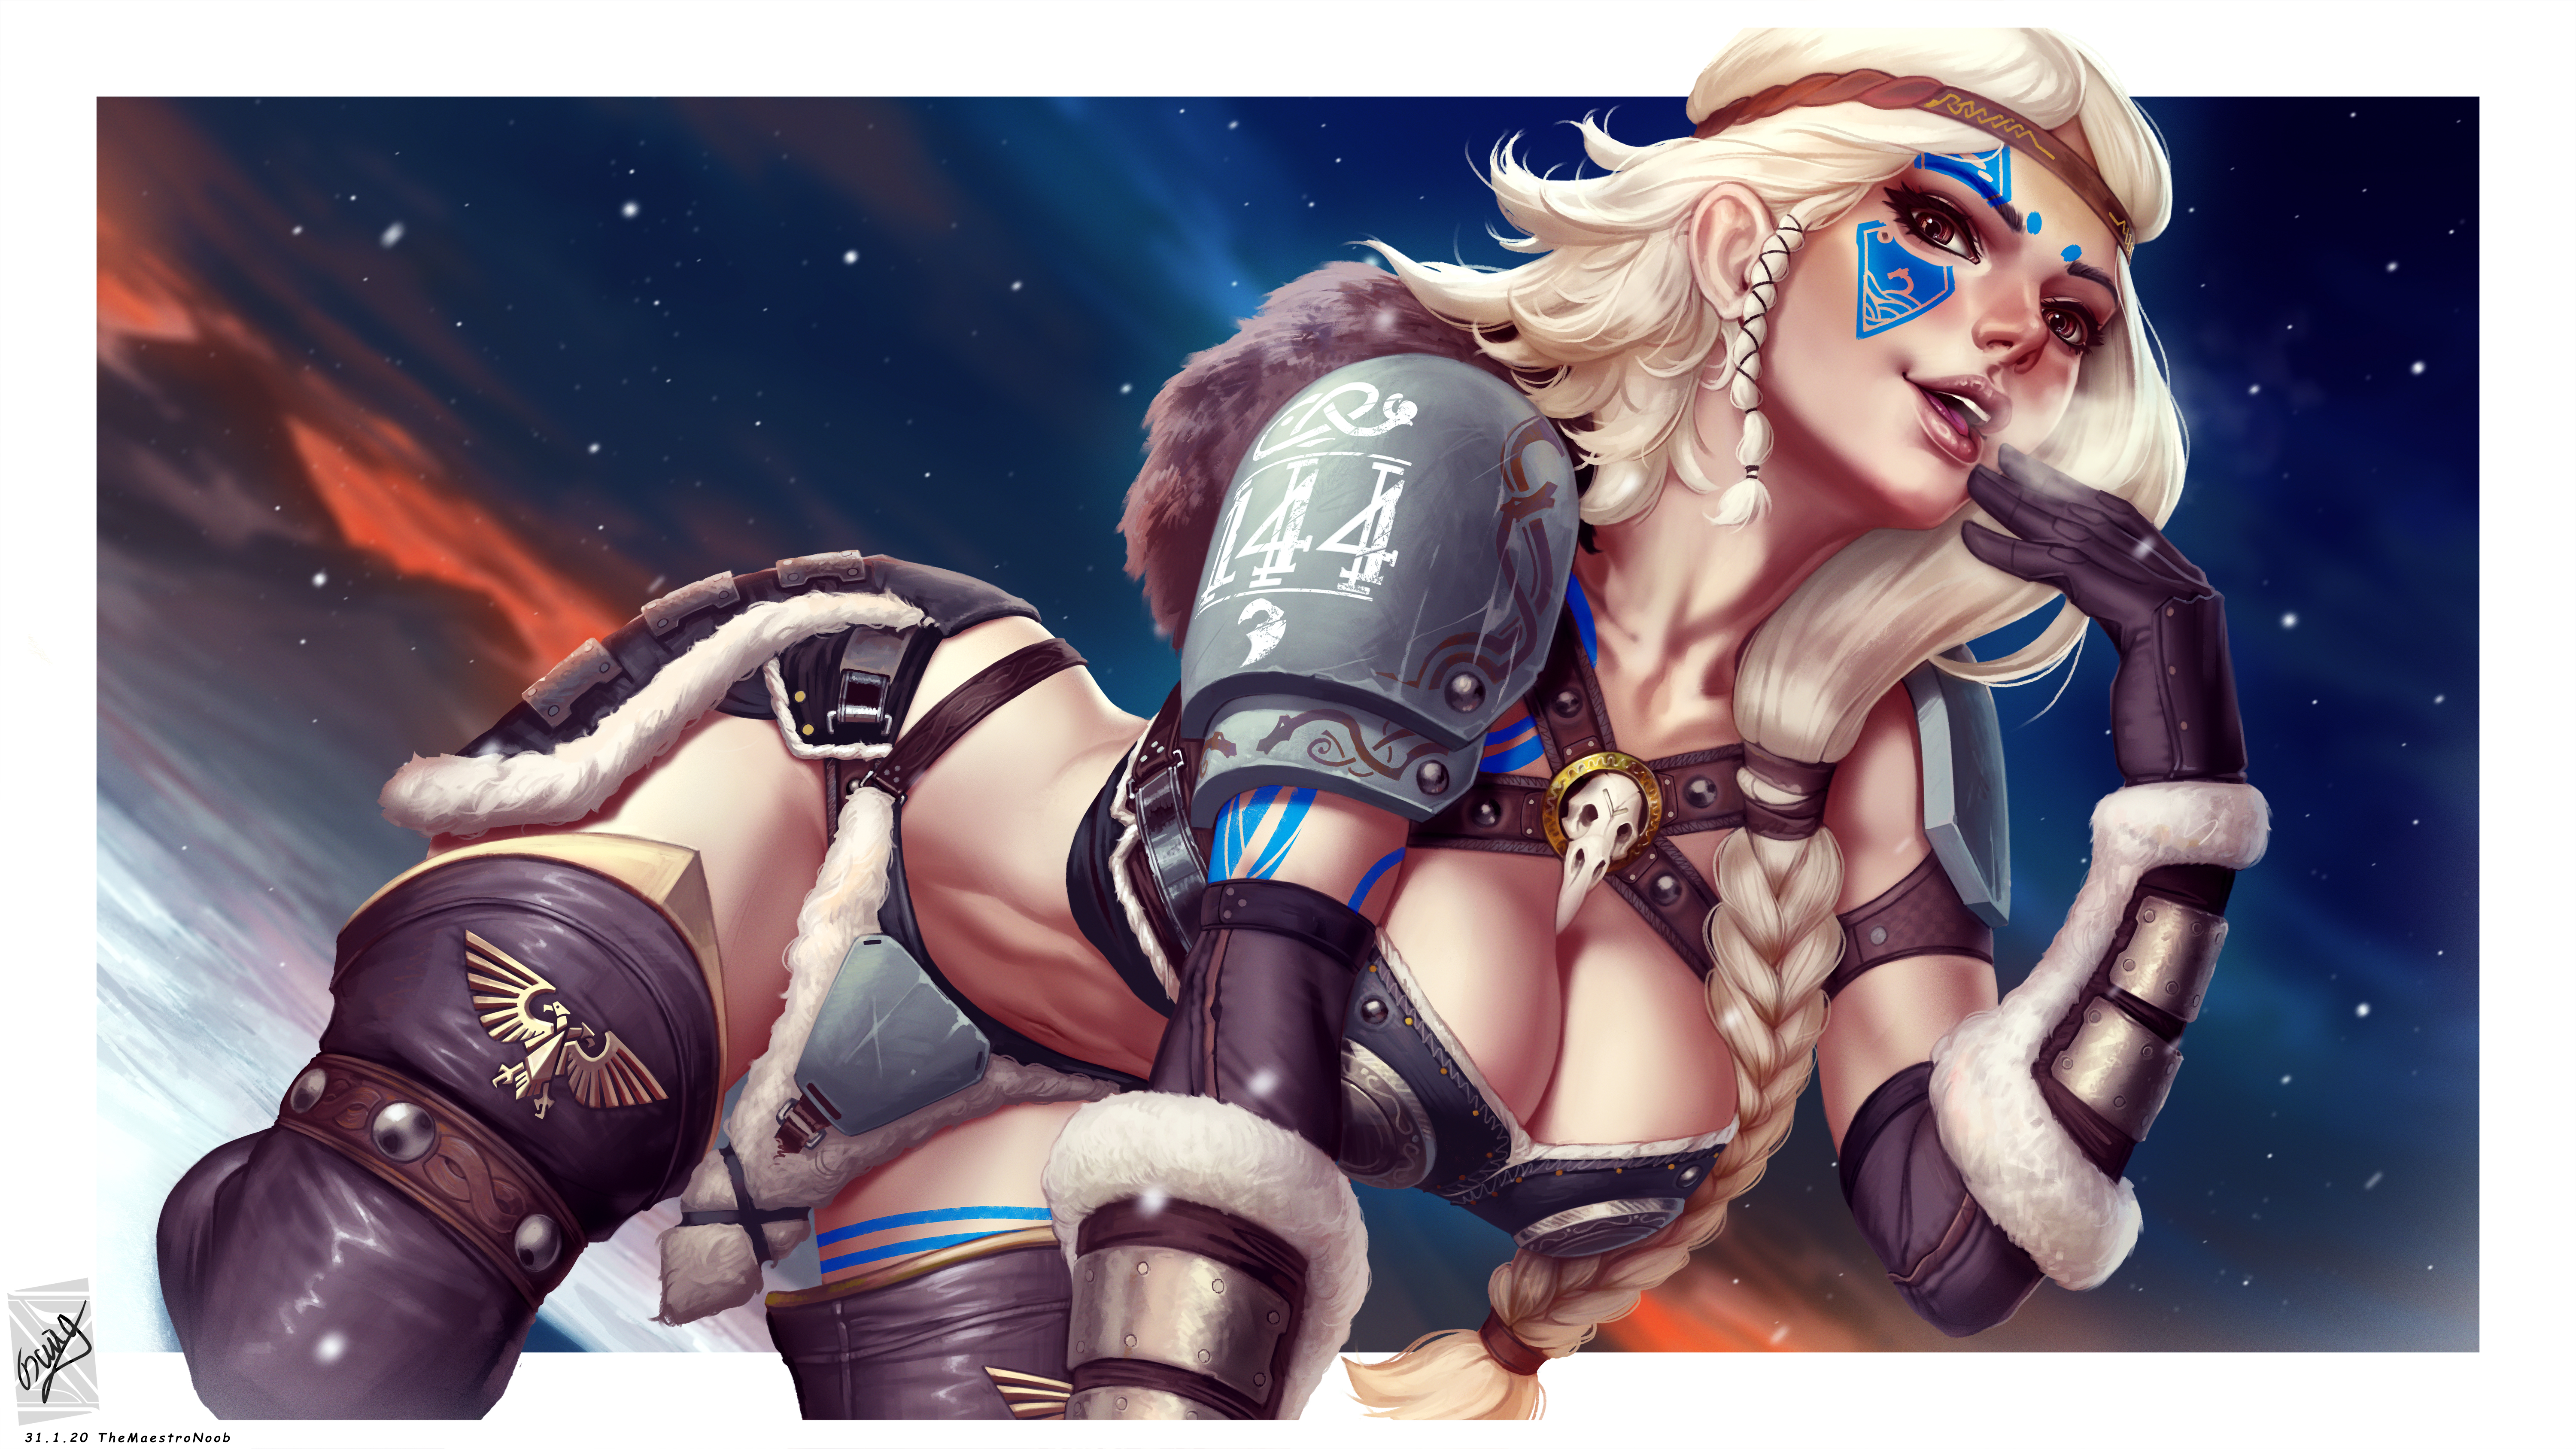 General 6000x3375 Vikings blonde cleavage armor loincloth bent over sky thigh high boots arm warmers Warhammer Warhammer 40,000 video games video game girls video game characters 2D artwork drawing fan art TheMaestroNoob big boobs braids space wolves